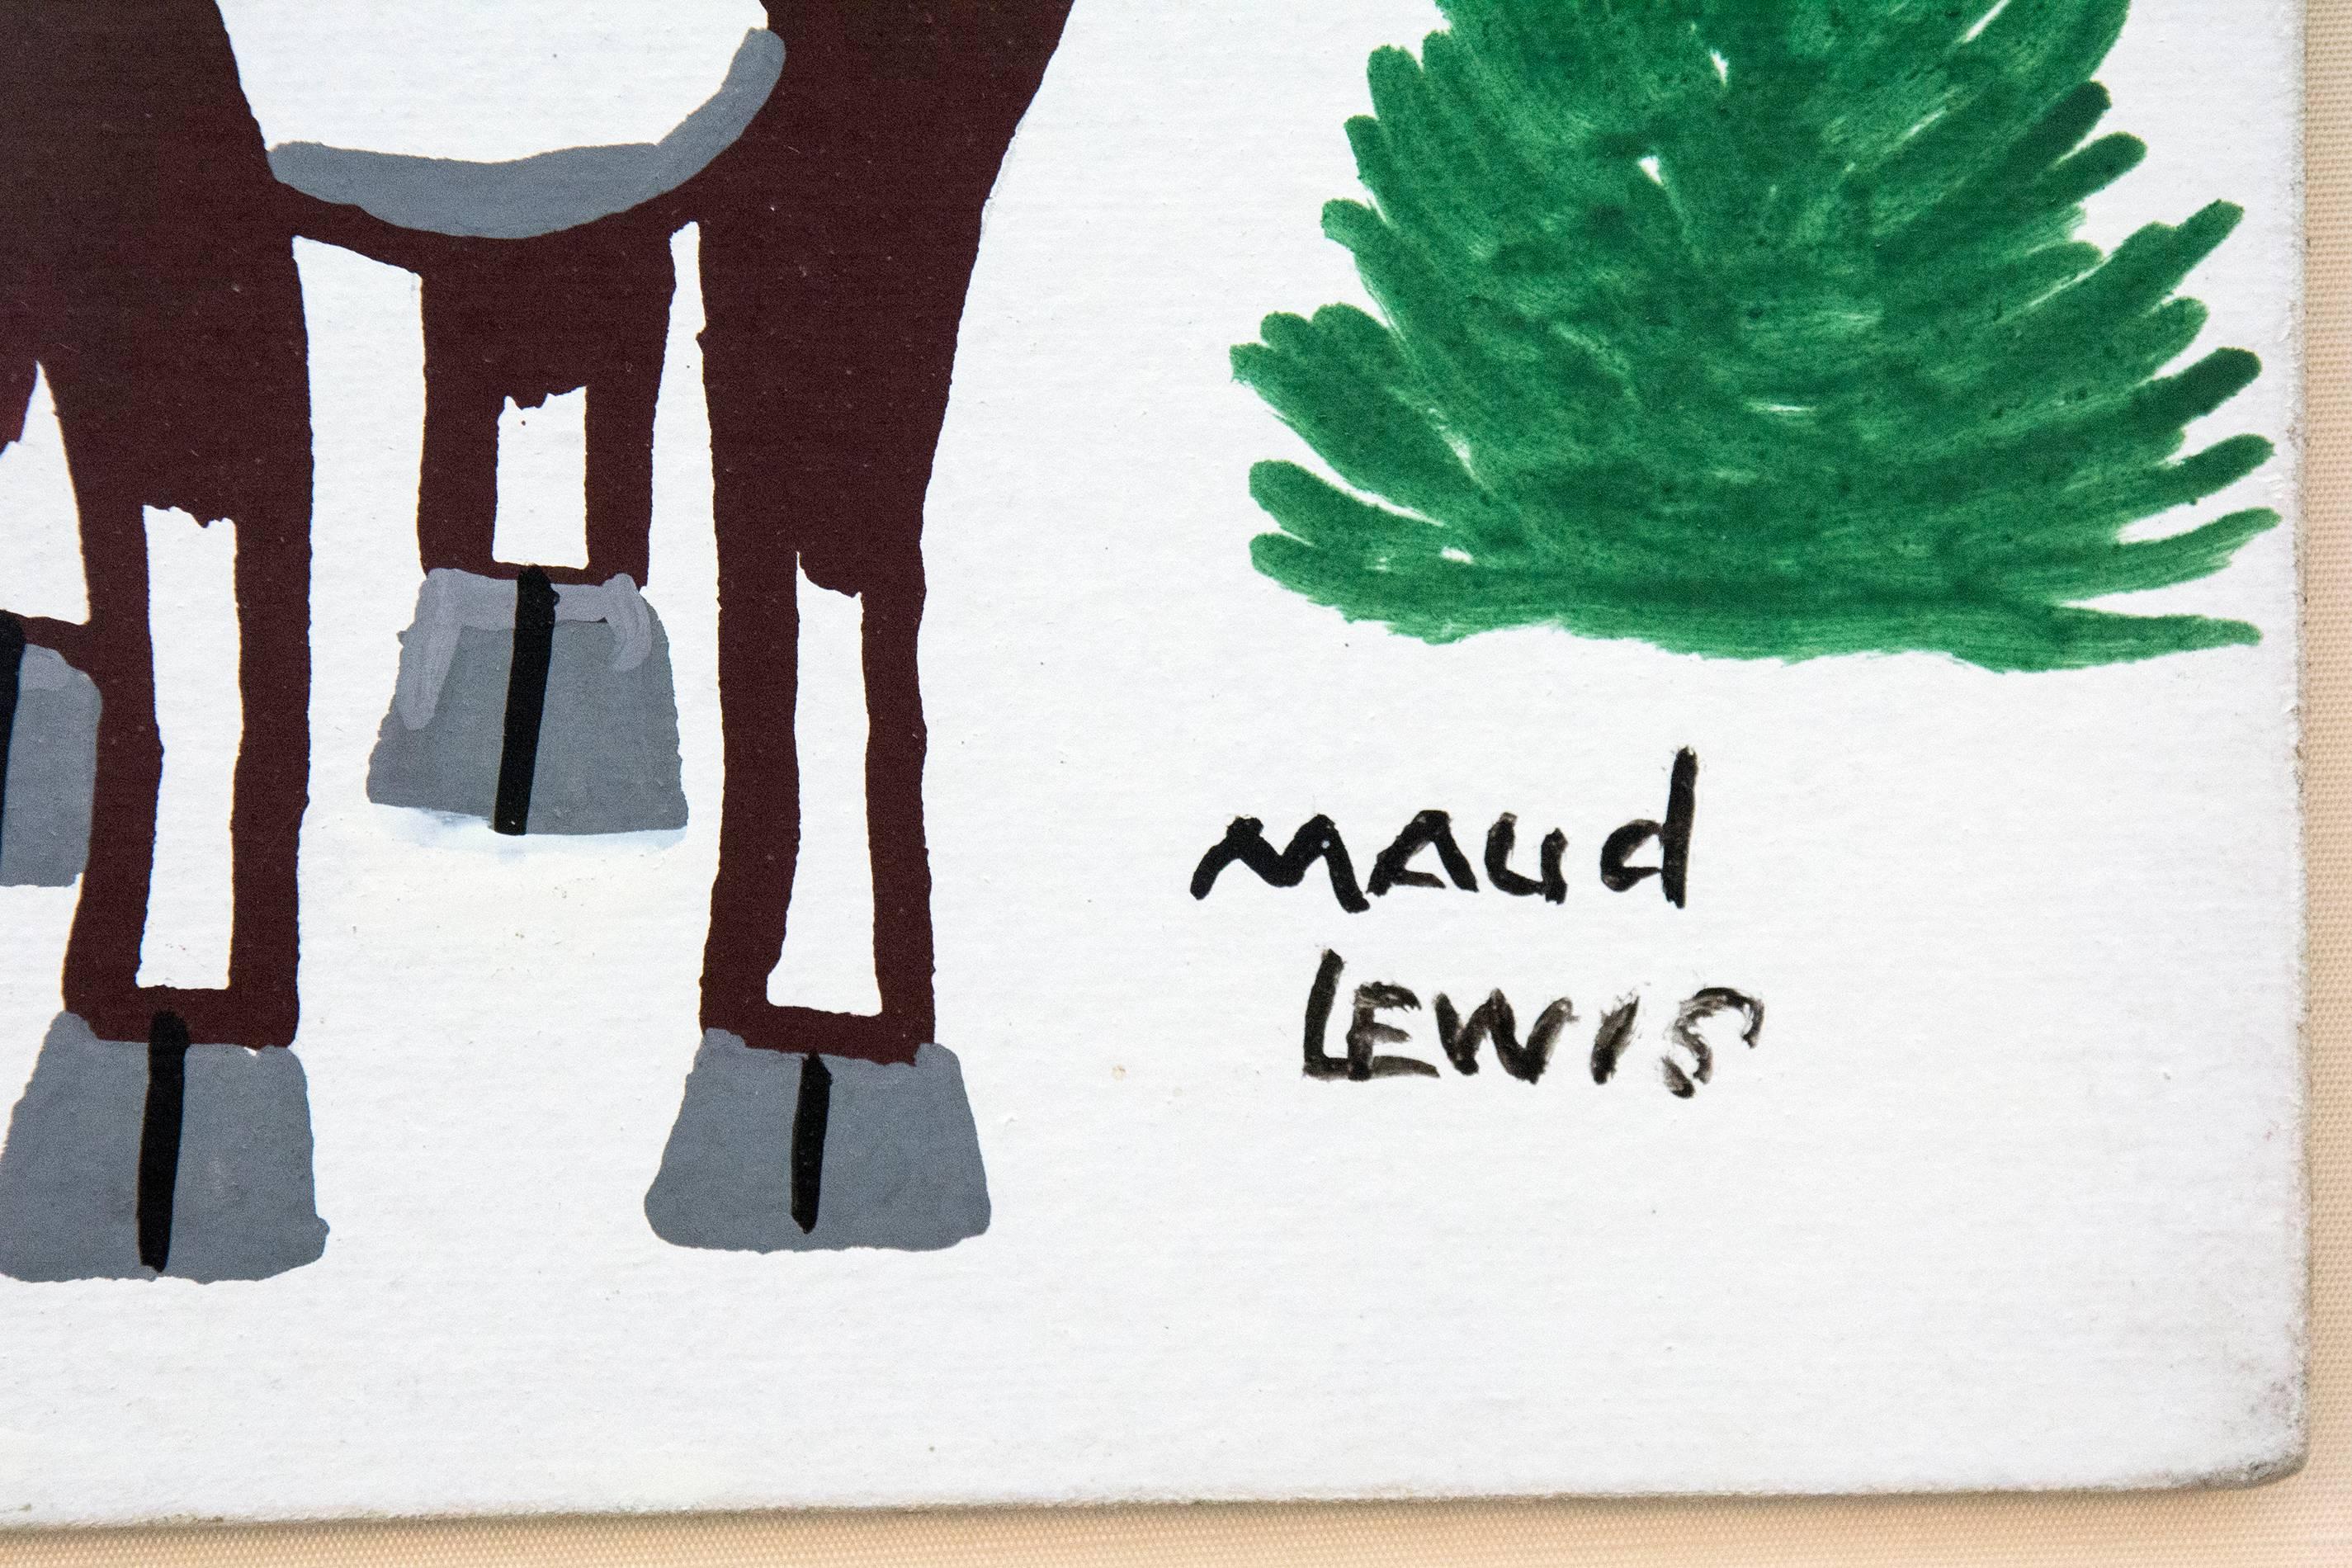 Pair of Oxen - Black Animal Painting by Maud Lewis